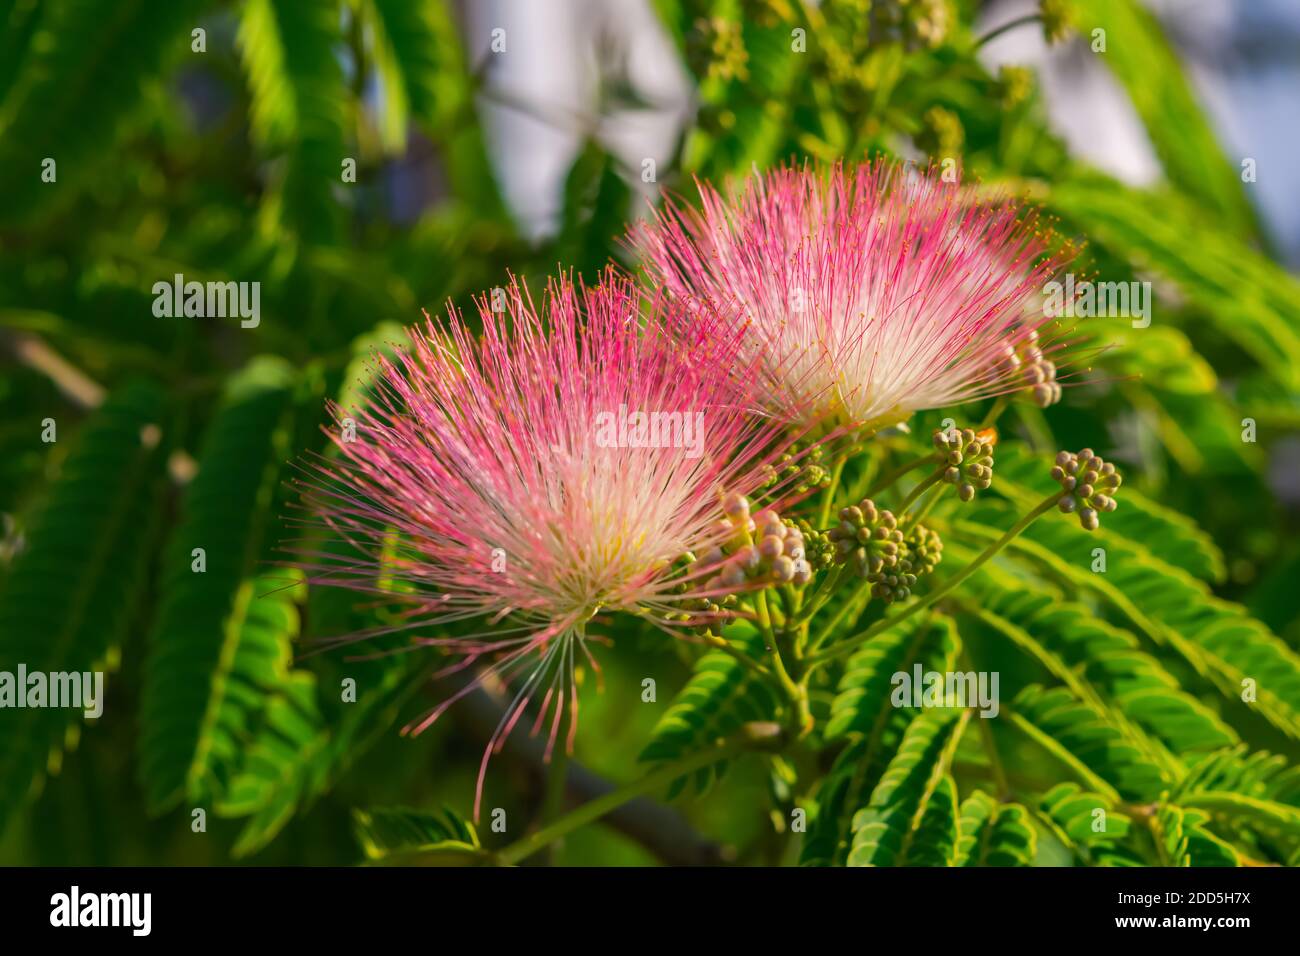 Albizia julibrissin flowers close-up on a blurry background. Albizia julibrissin blooms with fluffy bright pink flowers in the garden. Genus Albizia o Stock Photo